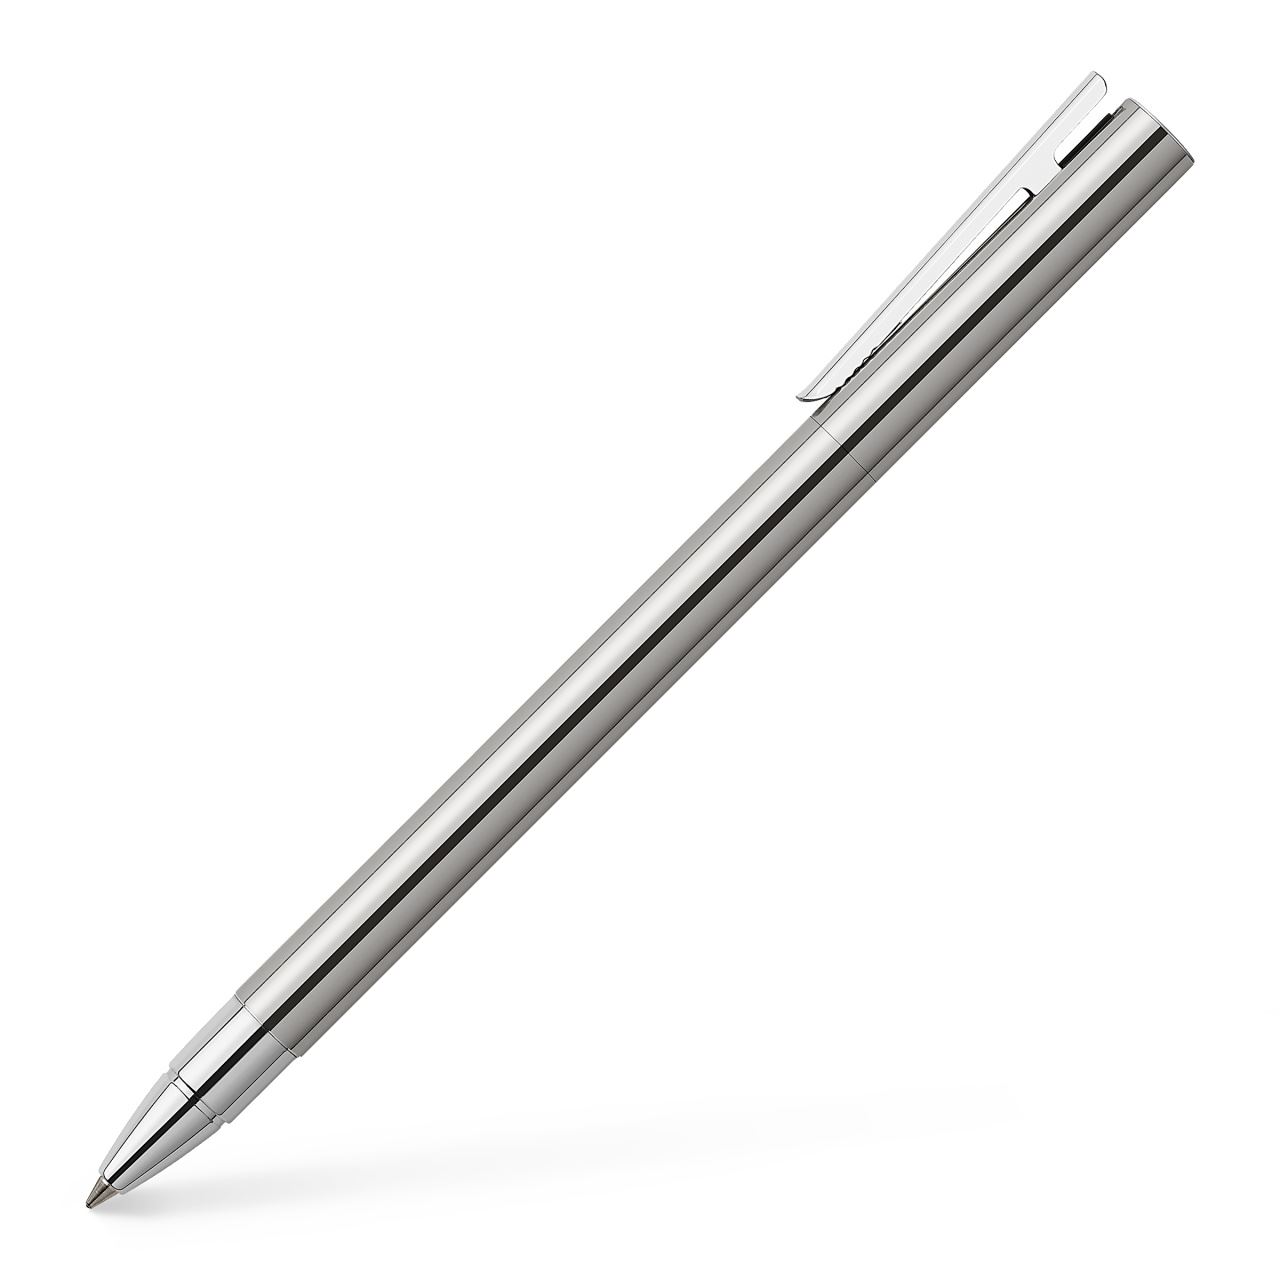 Faber-Castell - Neo Slim Stainless Steel rollerball, silver shiny